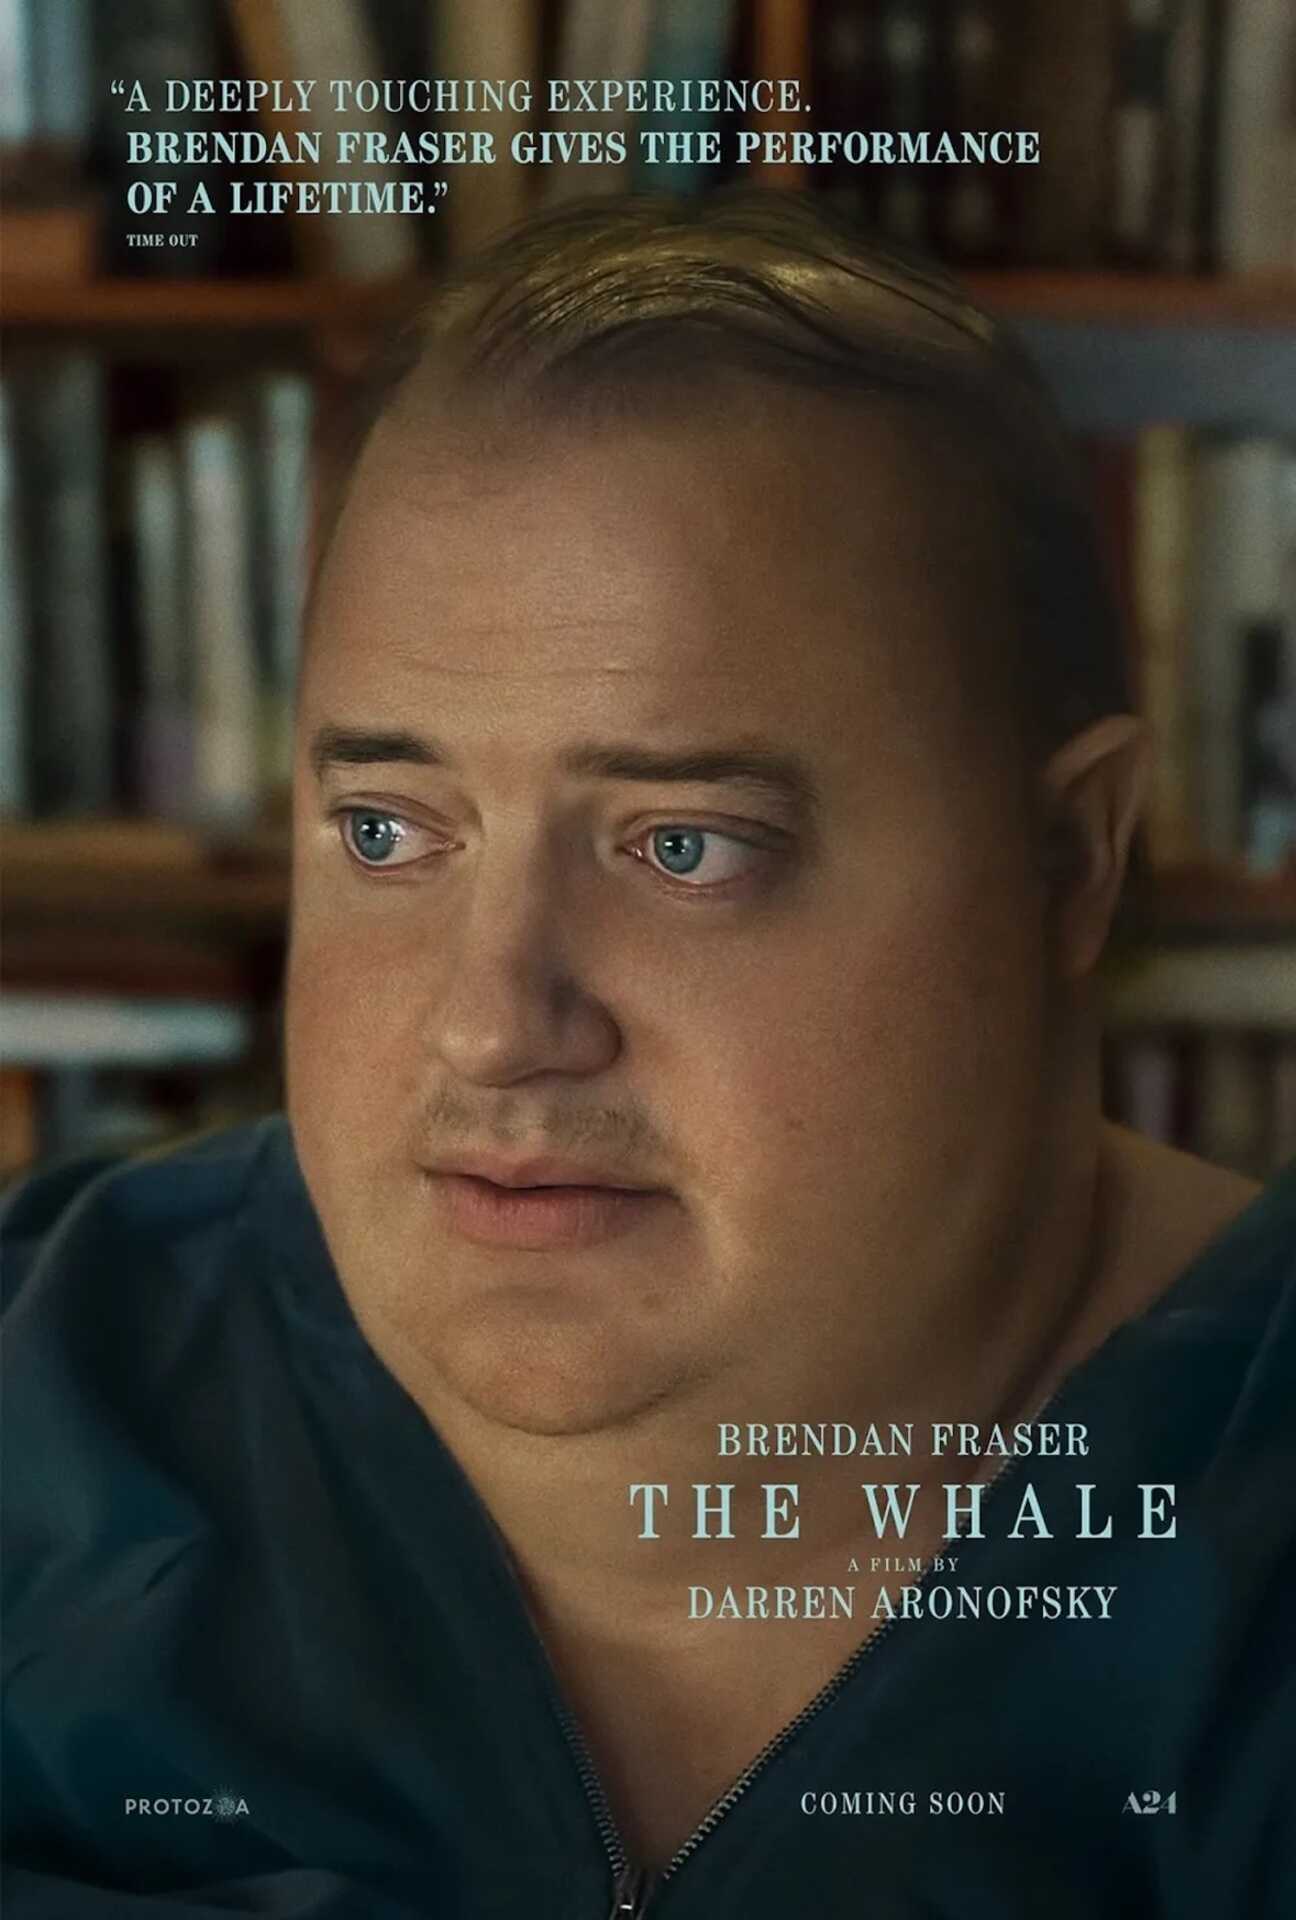 Theatrical poster for The Whale, directed by Darren Aronofsky. Image courtesy of A24.